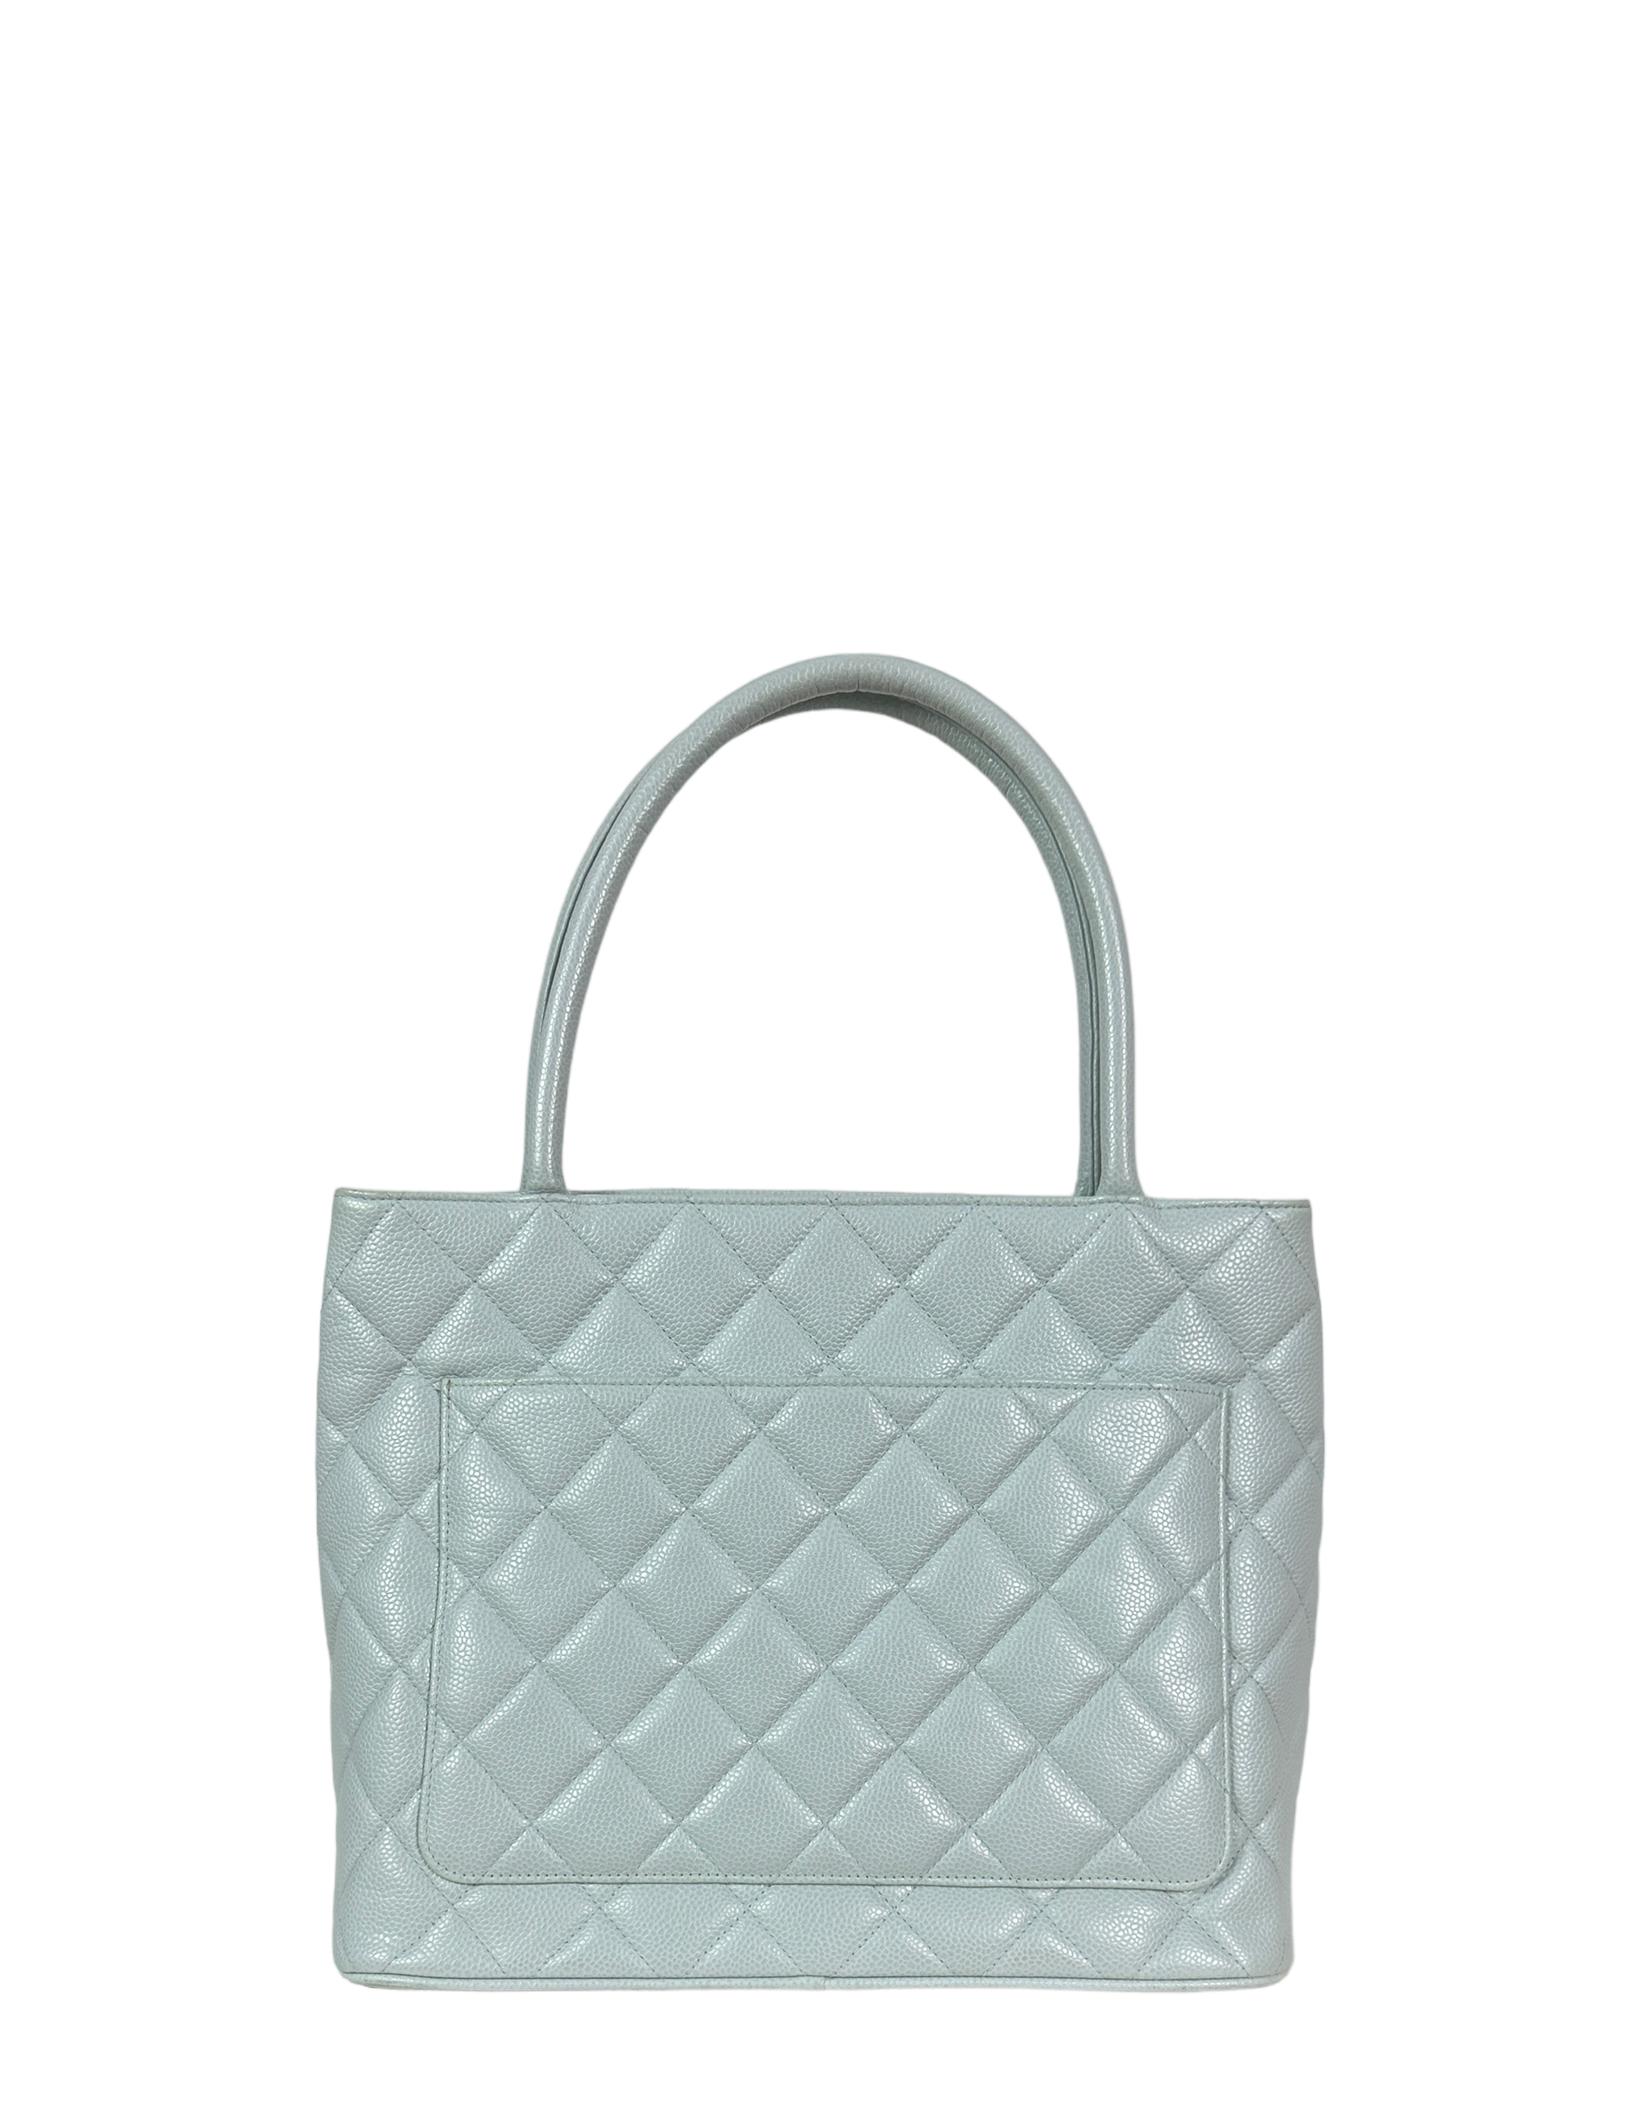 Chanel Light Blue Caviar Leather CC Medallion Tote Bag In Good Condition For Sale In New York, NY